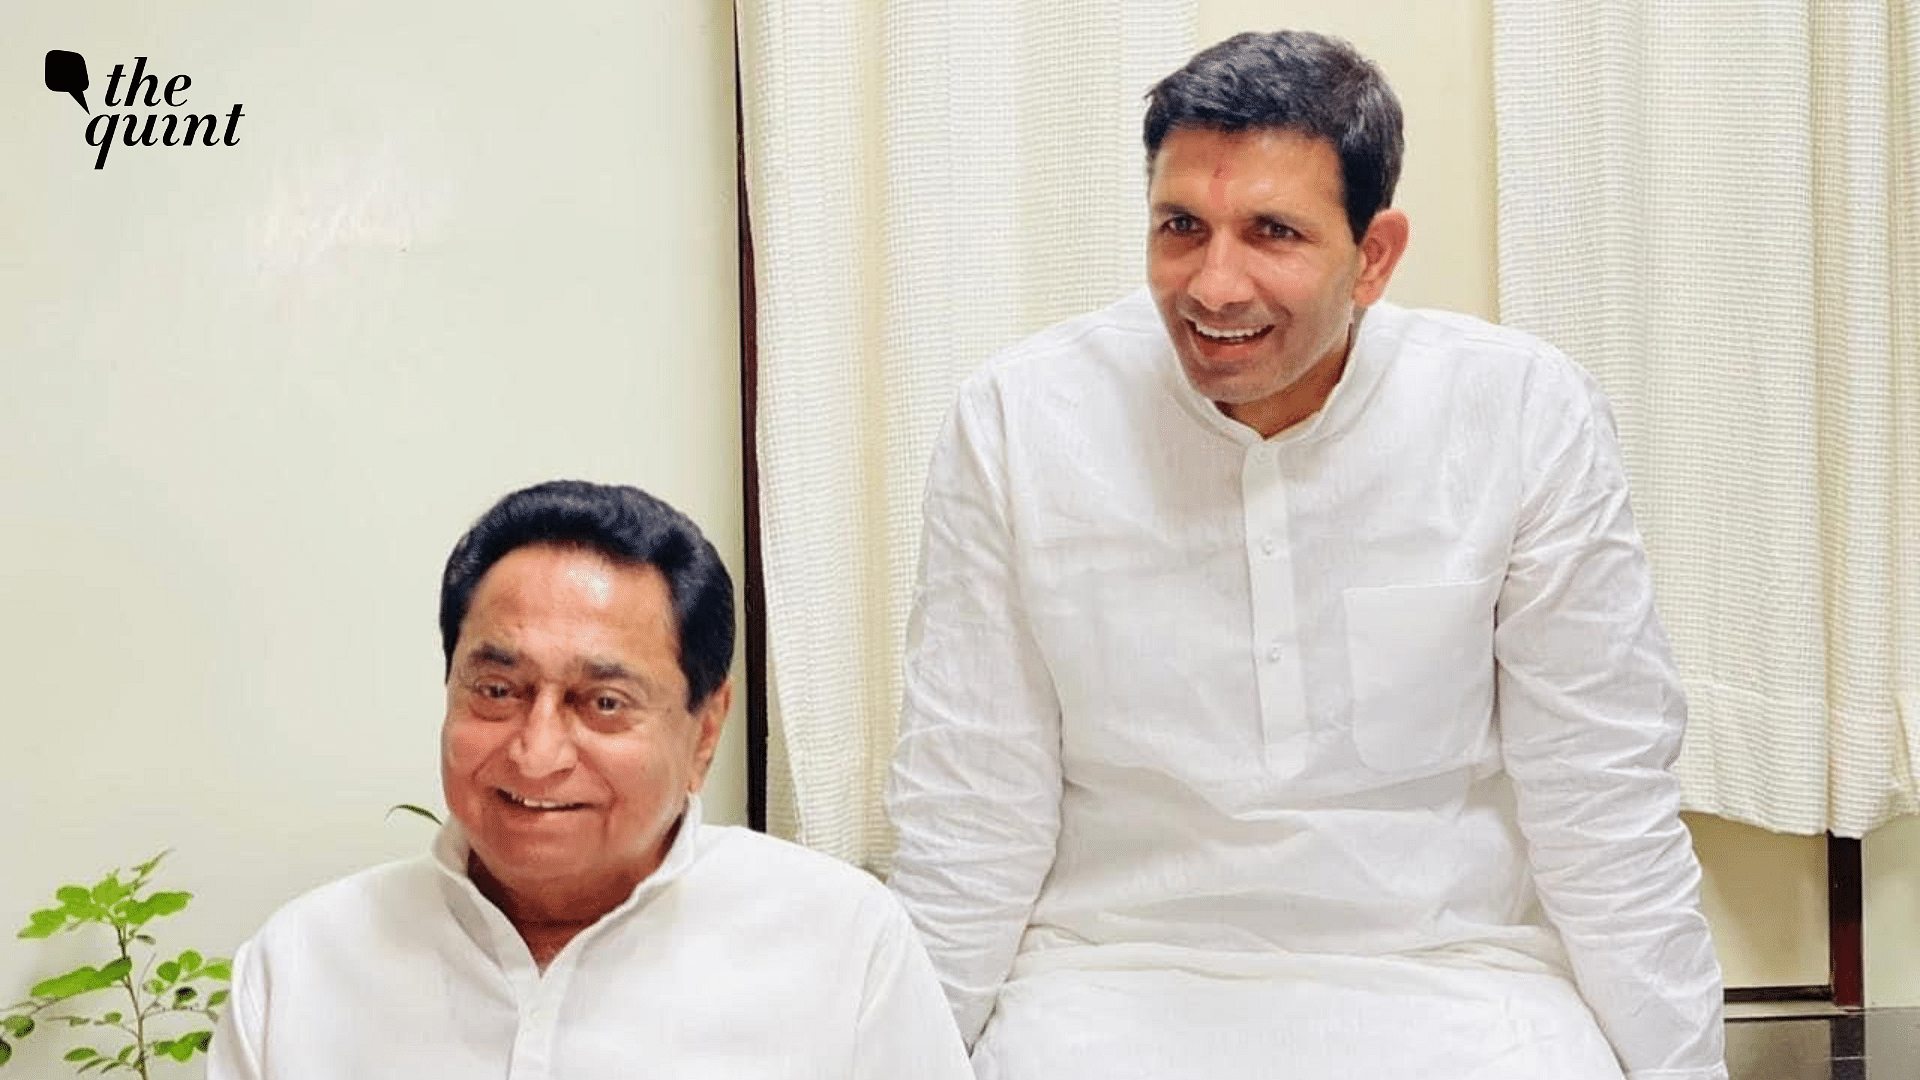 <div class="paragraphs"><p>The Indian National Congress appointed Jitu Patwari as its Madhya Pradesh chief on Saturday, replacing Kamal Nath days after the party’s meagre performance in the state during recent Assembly elections.</p></div>